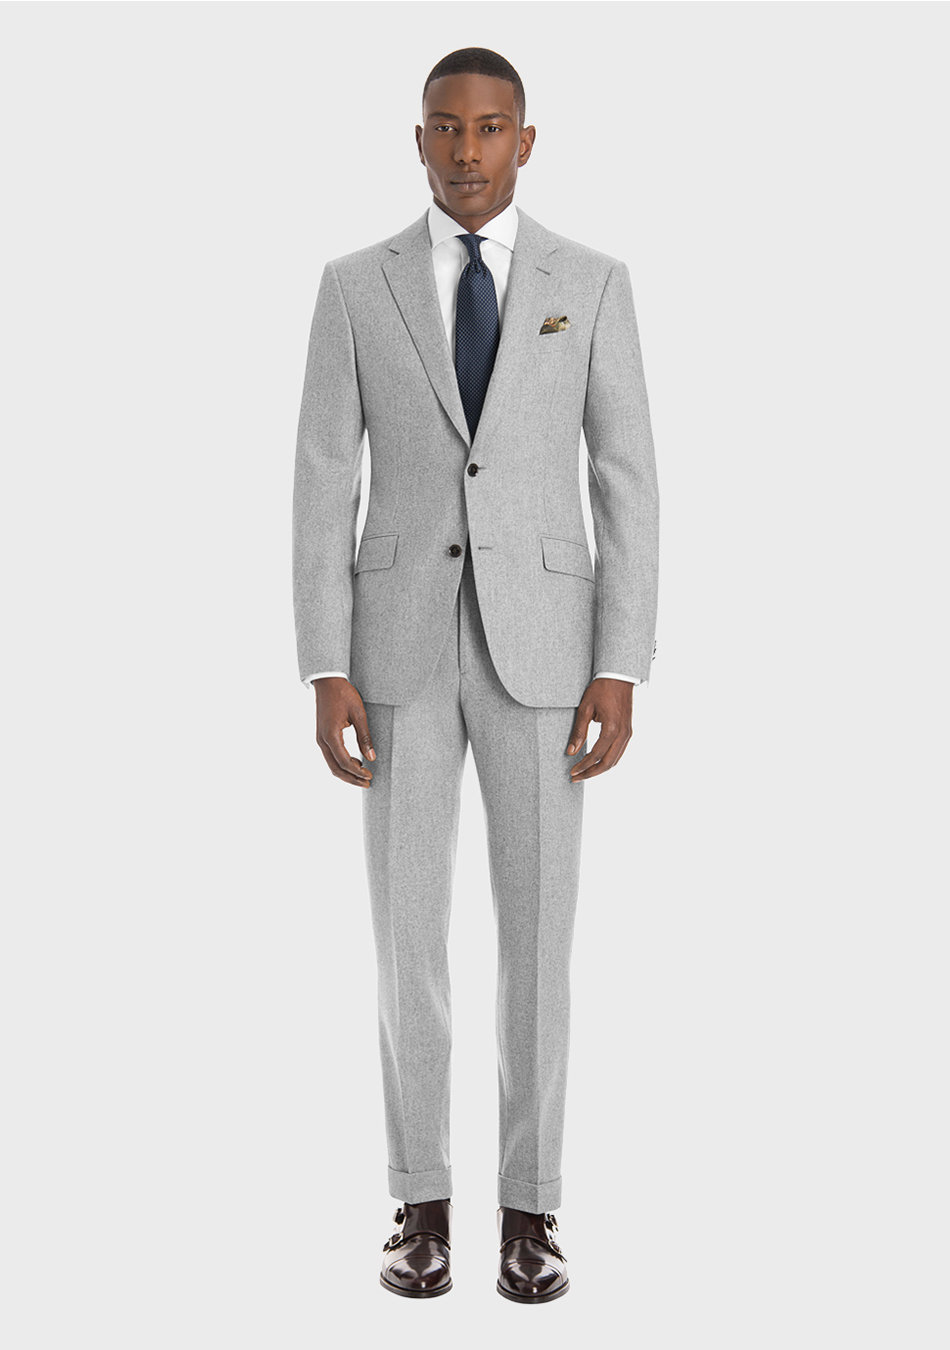 Light grey suit, white dress shirt, and charcoal dotted tie